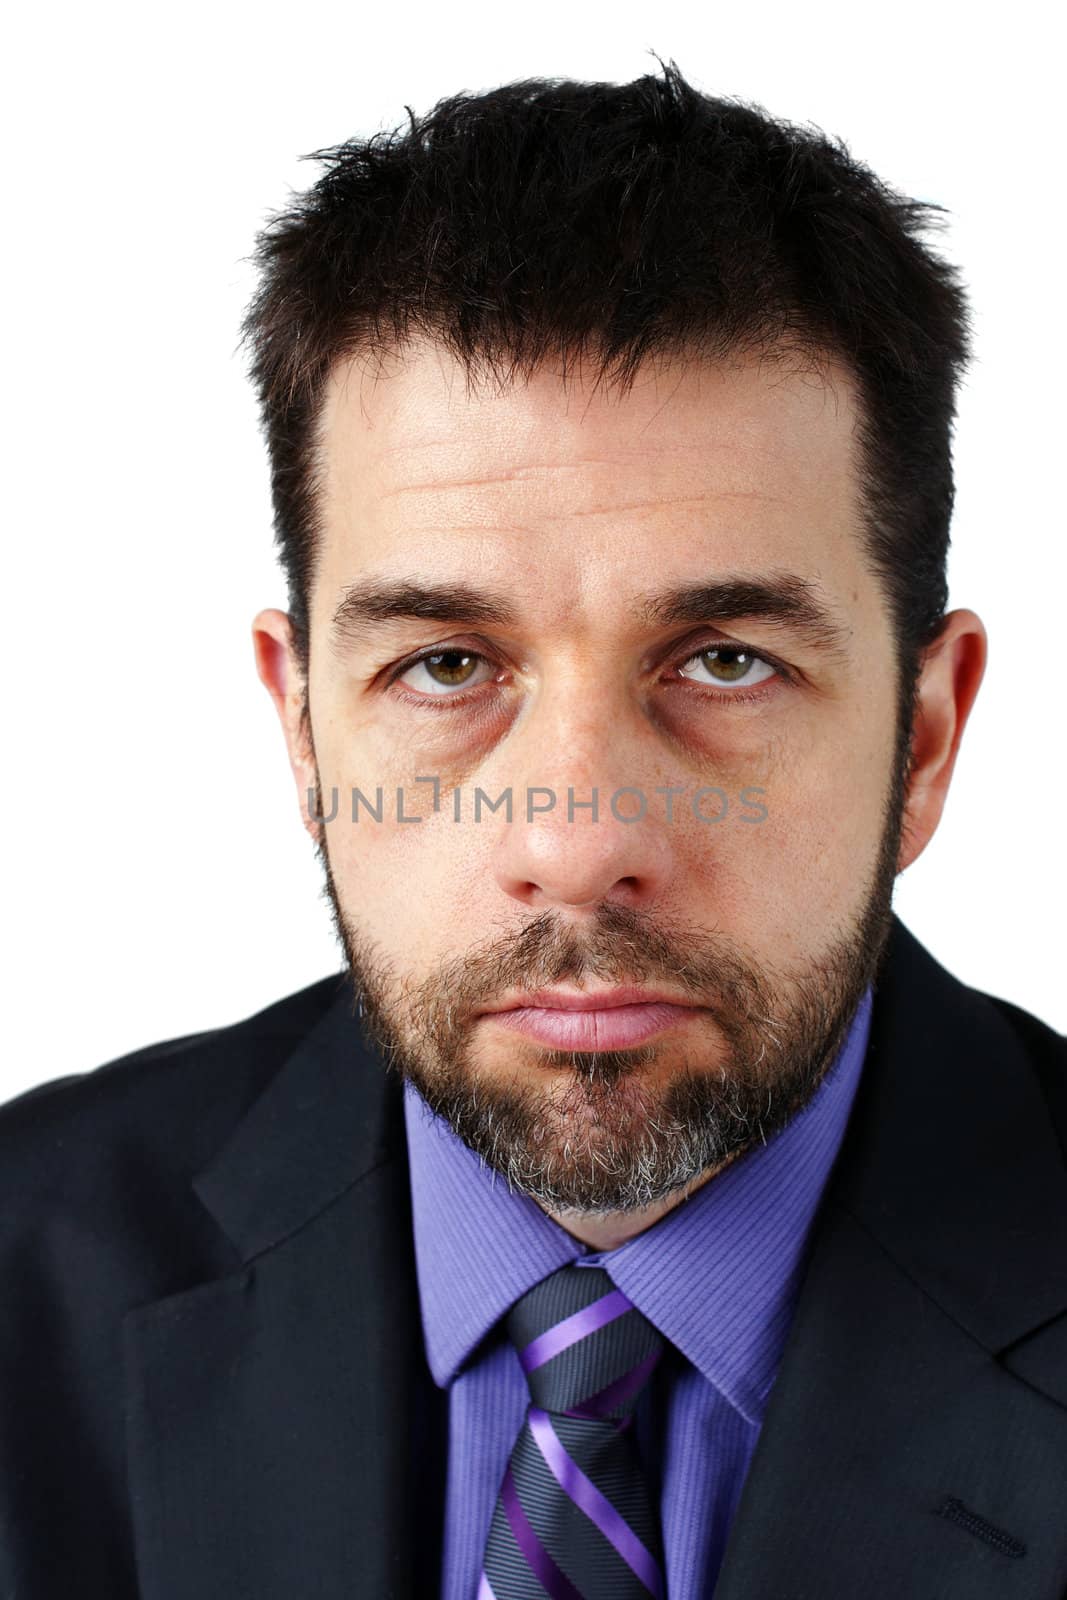 Portrait of middle aged caucasian man with beard, looking sad or angry, could be disgruntled employee or depressed, stressed or overworked boss.